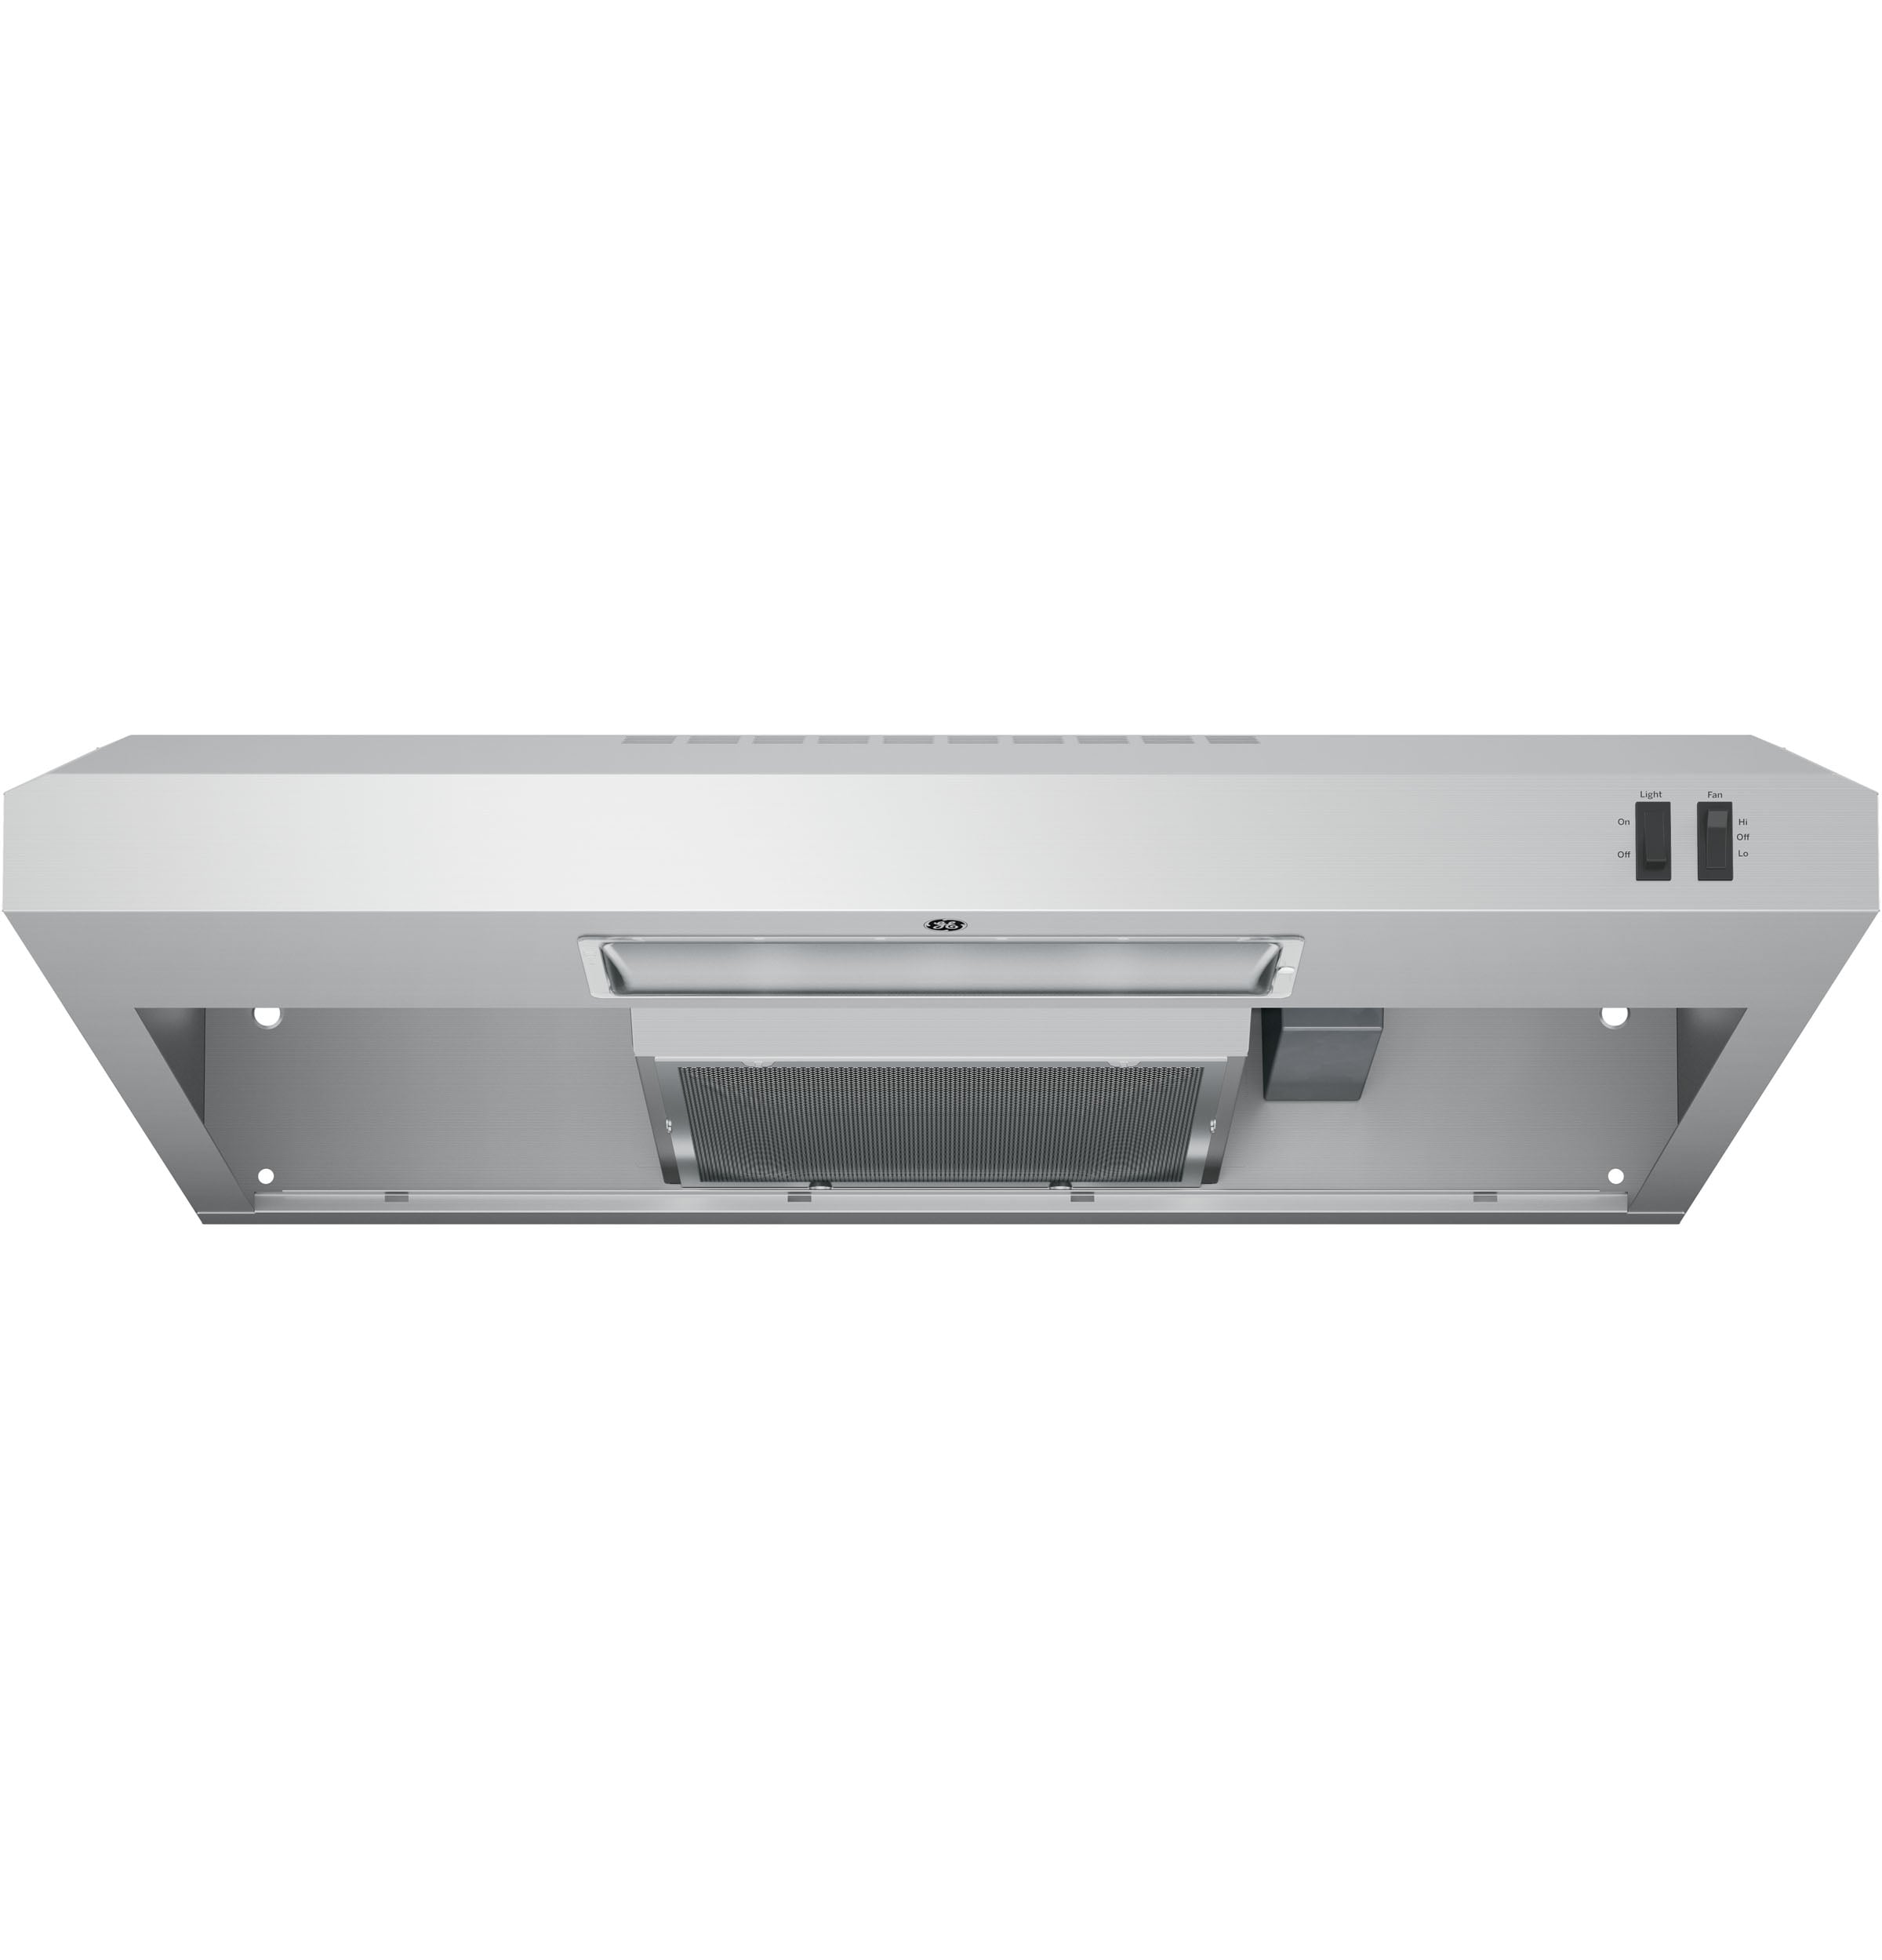 EVERKITCH Range Hood 30 inch Under Cabinet, EVERKIcH, 800CFM, Stainless Steel Kitchen Vent Stove Hood, Touch Control, Permanent Stainless